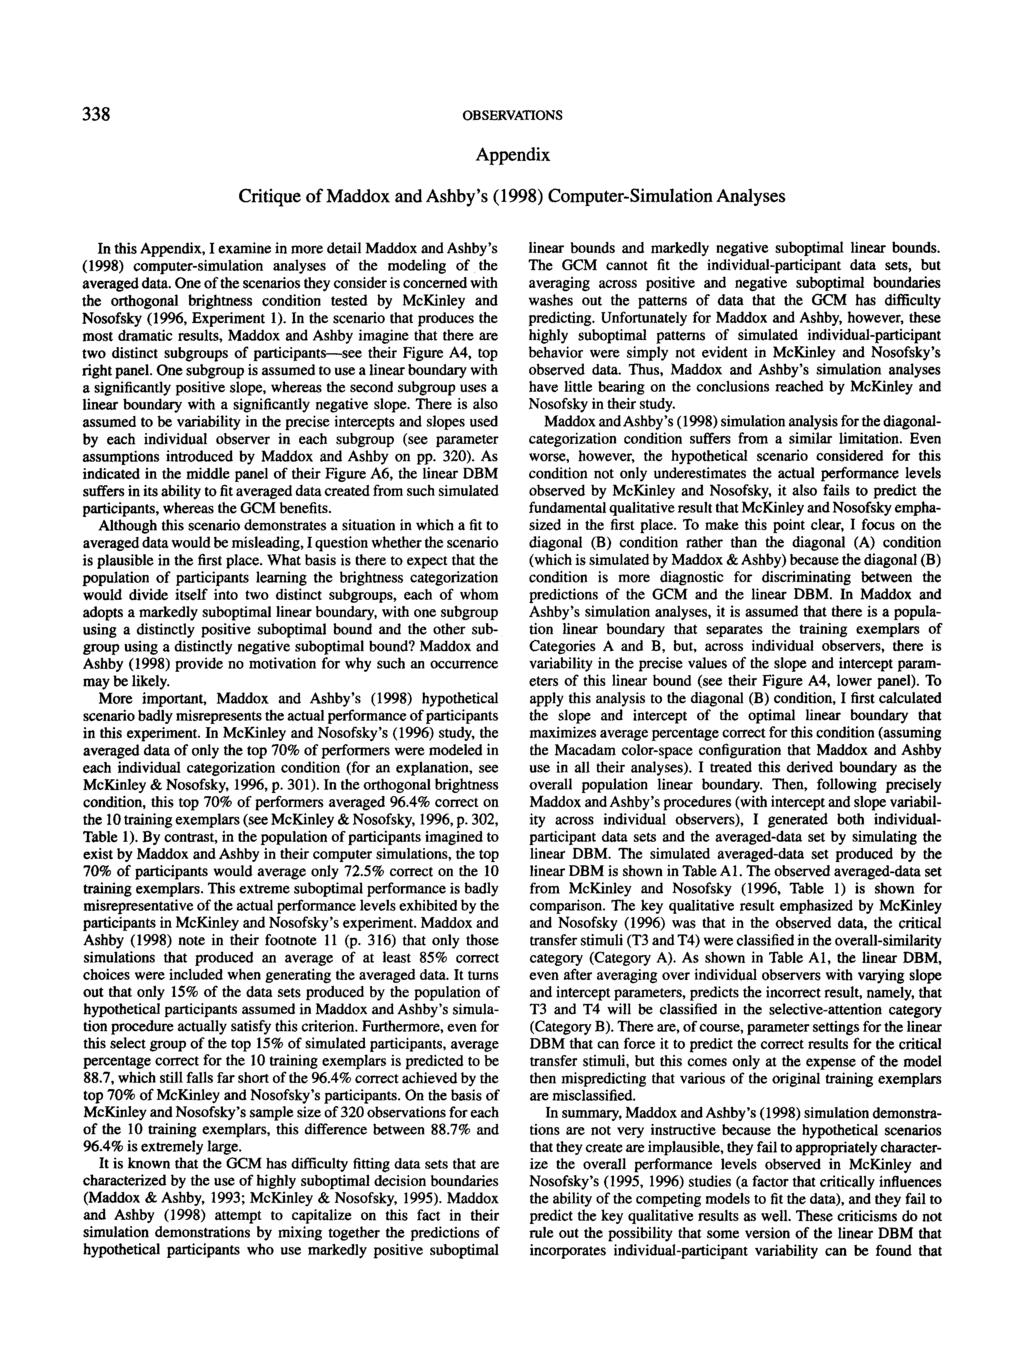 338 OBSERVATIONS Appendix Critique of Maddox and Ashby's (1998) Computer-Simulation Analyses In this Appendix, I examine in more detail Maddox and Ashby's (1998) computer-simulation analyses of the